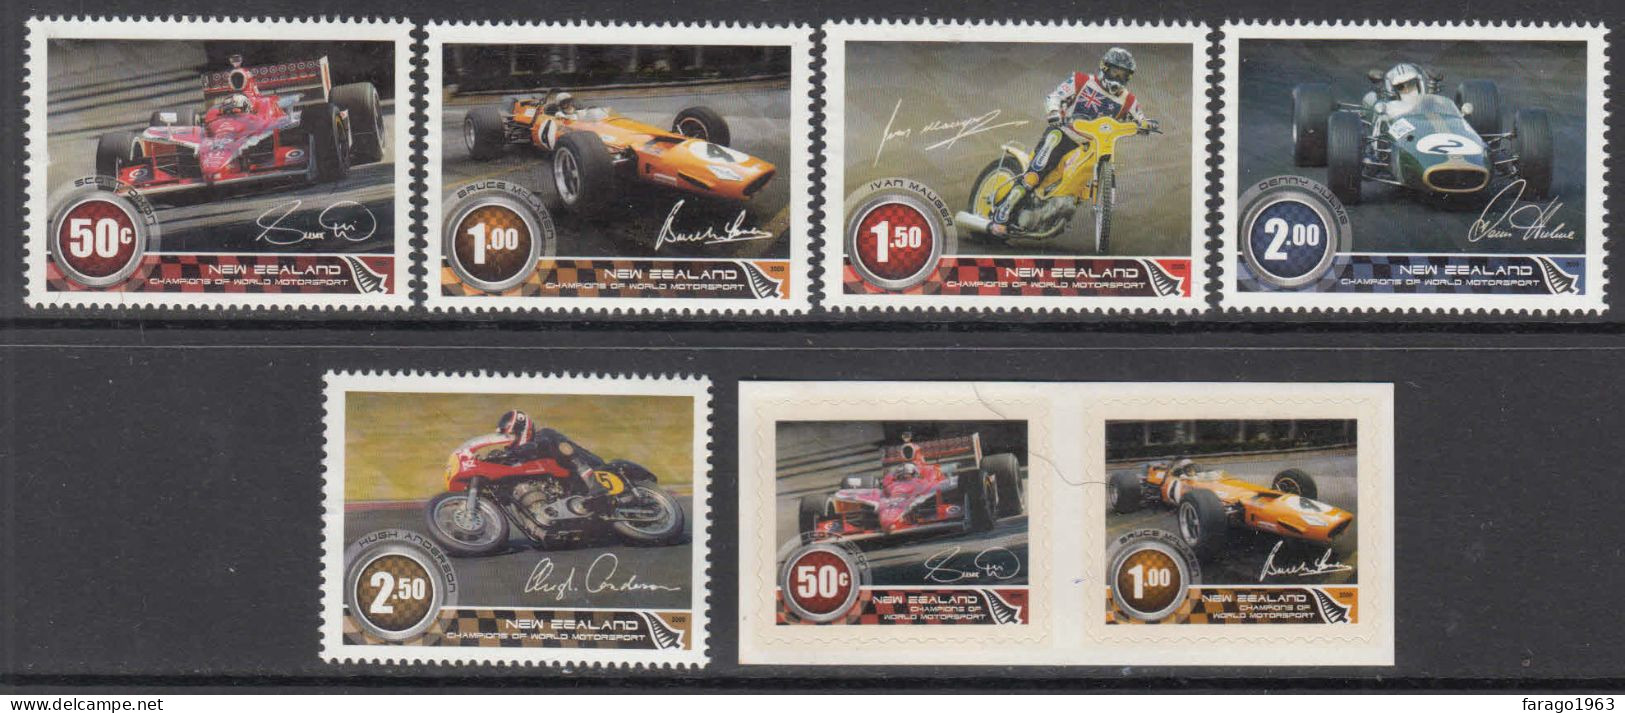 2009 New Zealand Motor Champions Car Racing Motorcycles Complete Set Of 7 MNH @ BELOW FACE VALUE - Nuovi